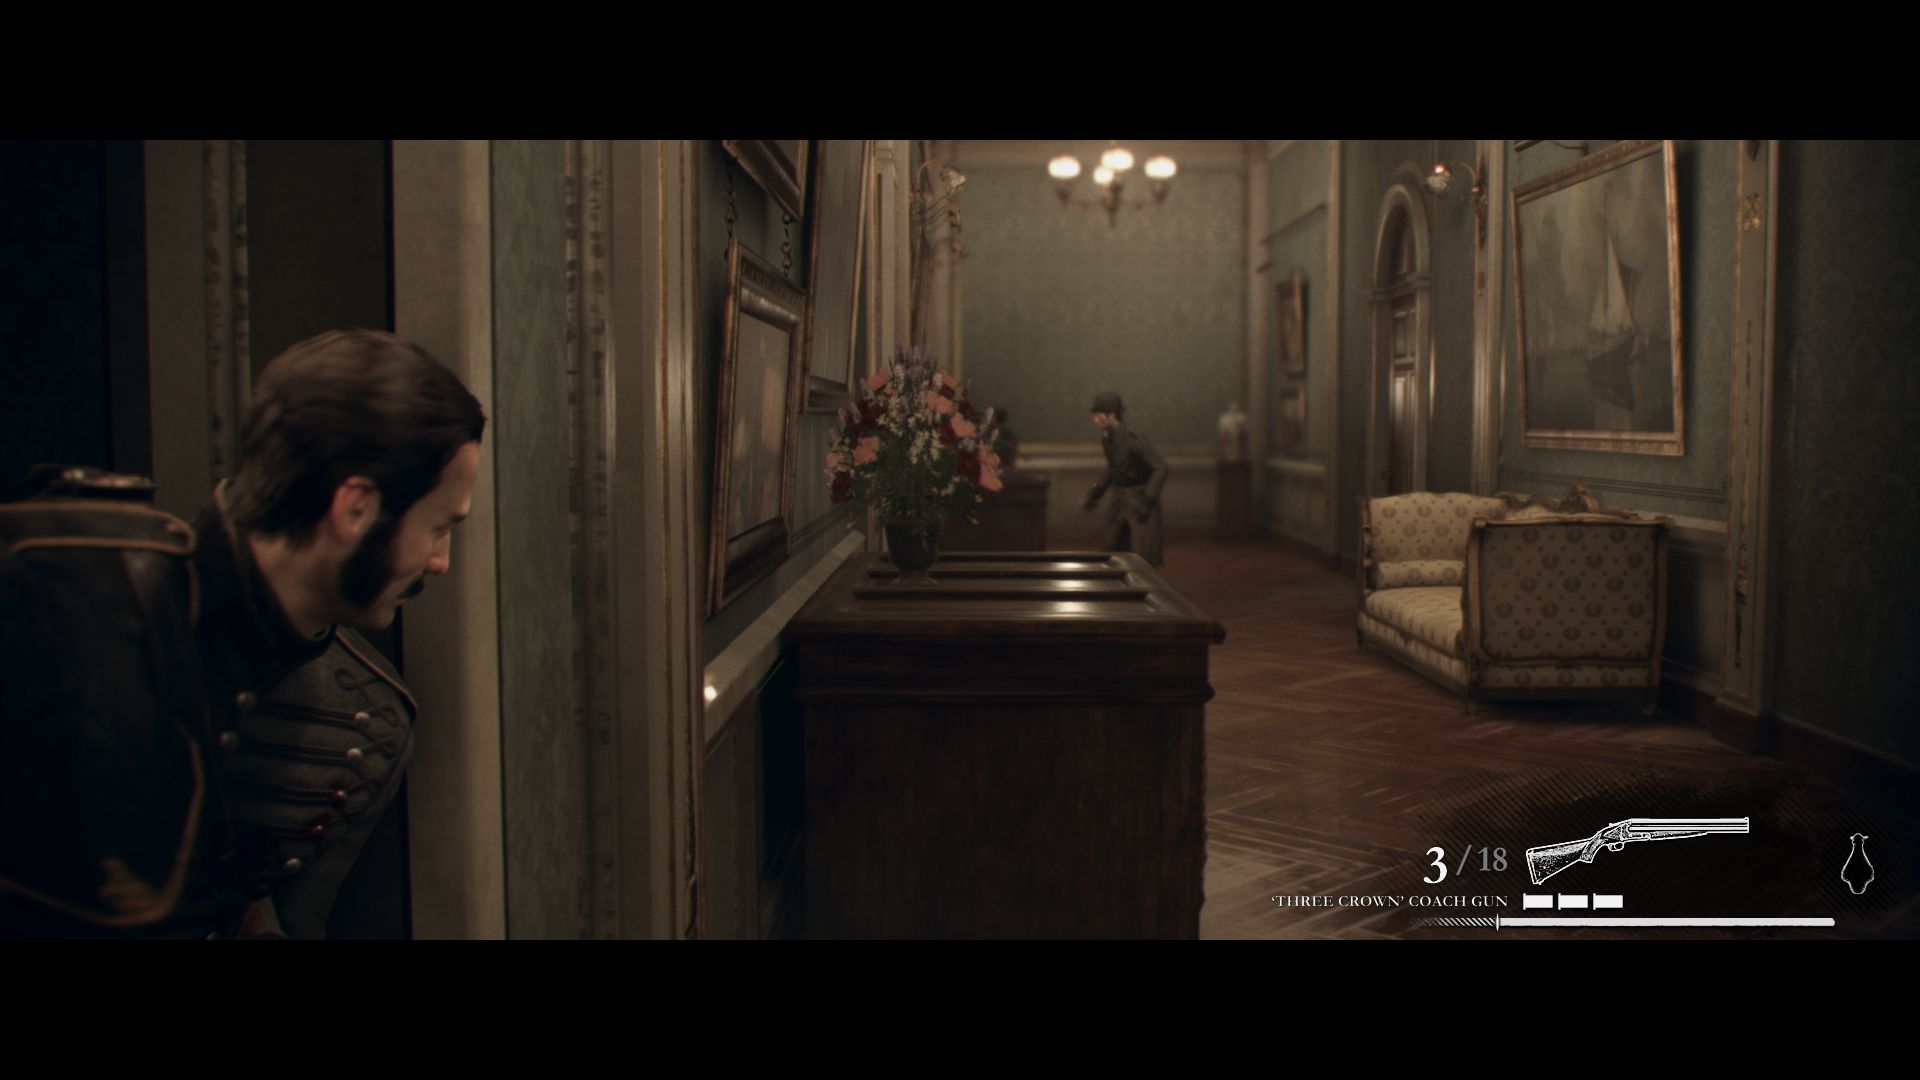 Ps4 1886. The order: 1886. Order 1886 ps4. The order 1886 геймплей. Орден 1886 ps4 Gameplay.